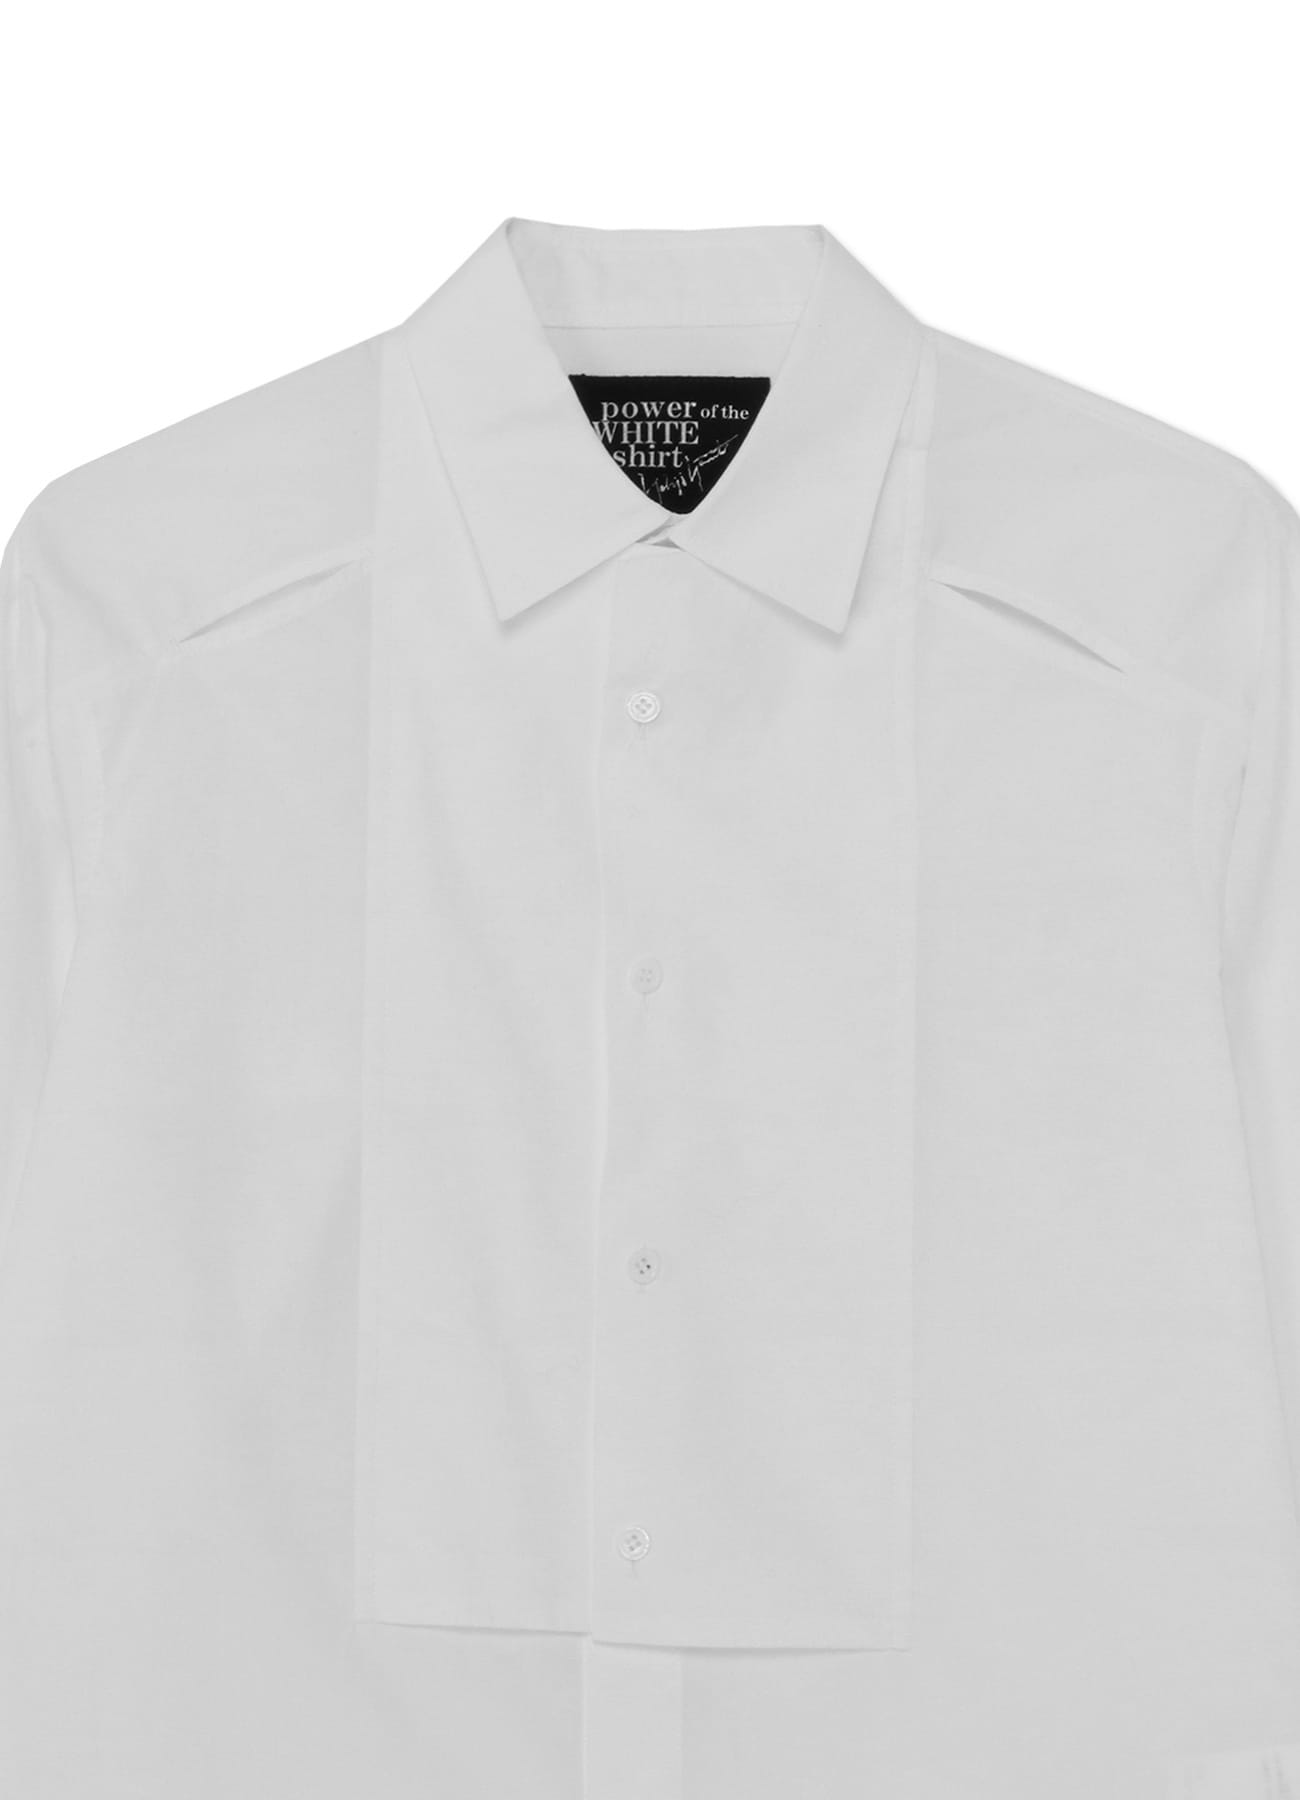 P・100/2 BROAD A-DOUBLE FRONT B(S White): power of the WHITE shirt 